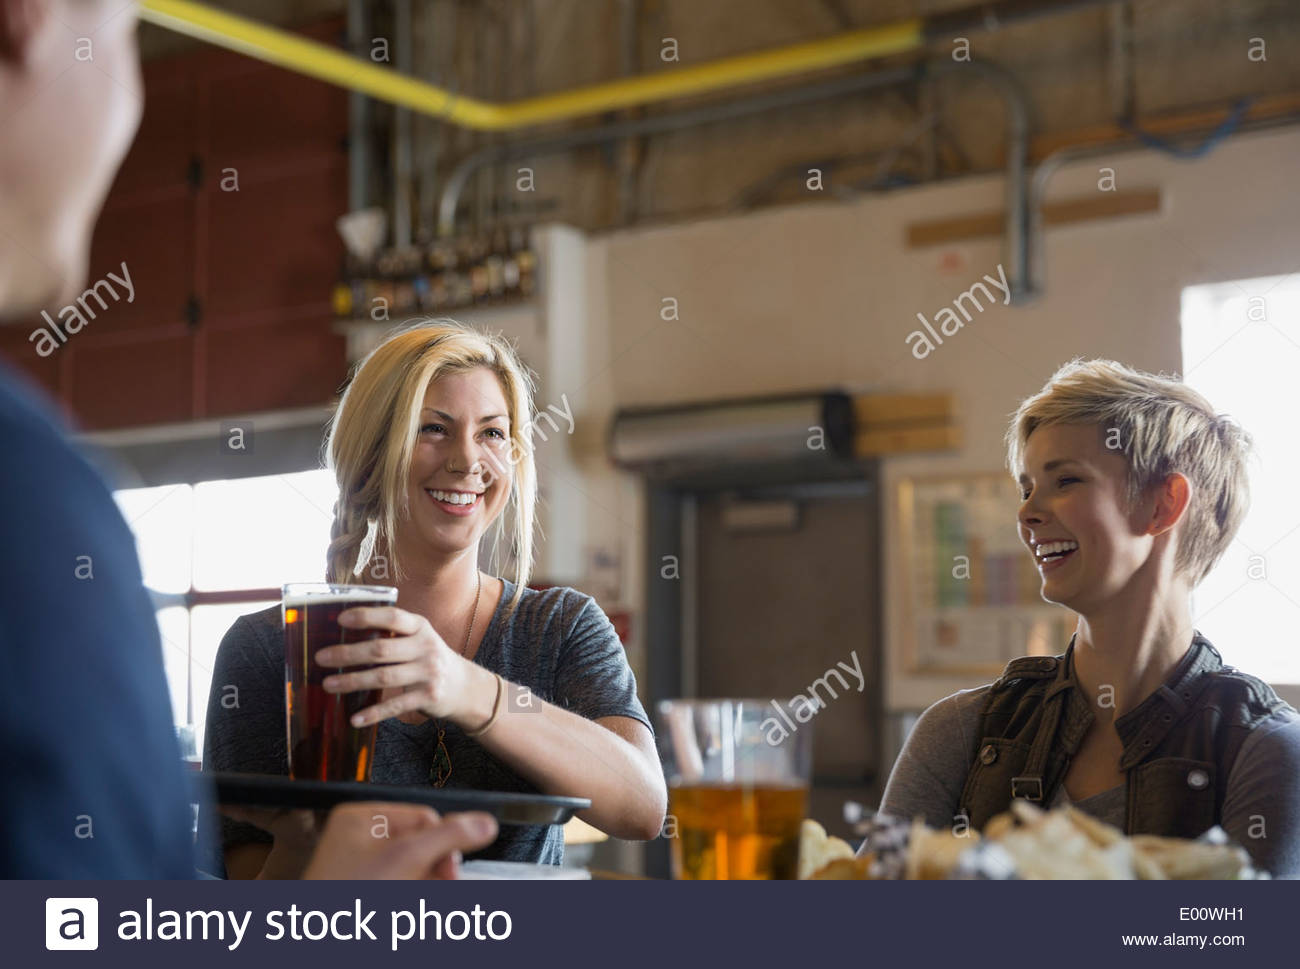 Waitress serving friends beer at brewery Stock Photo